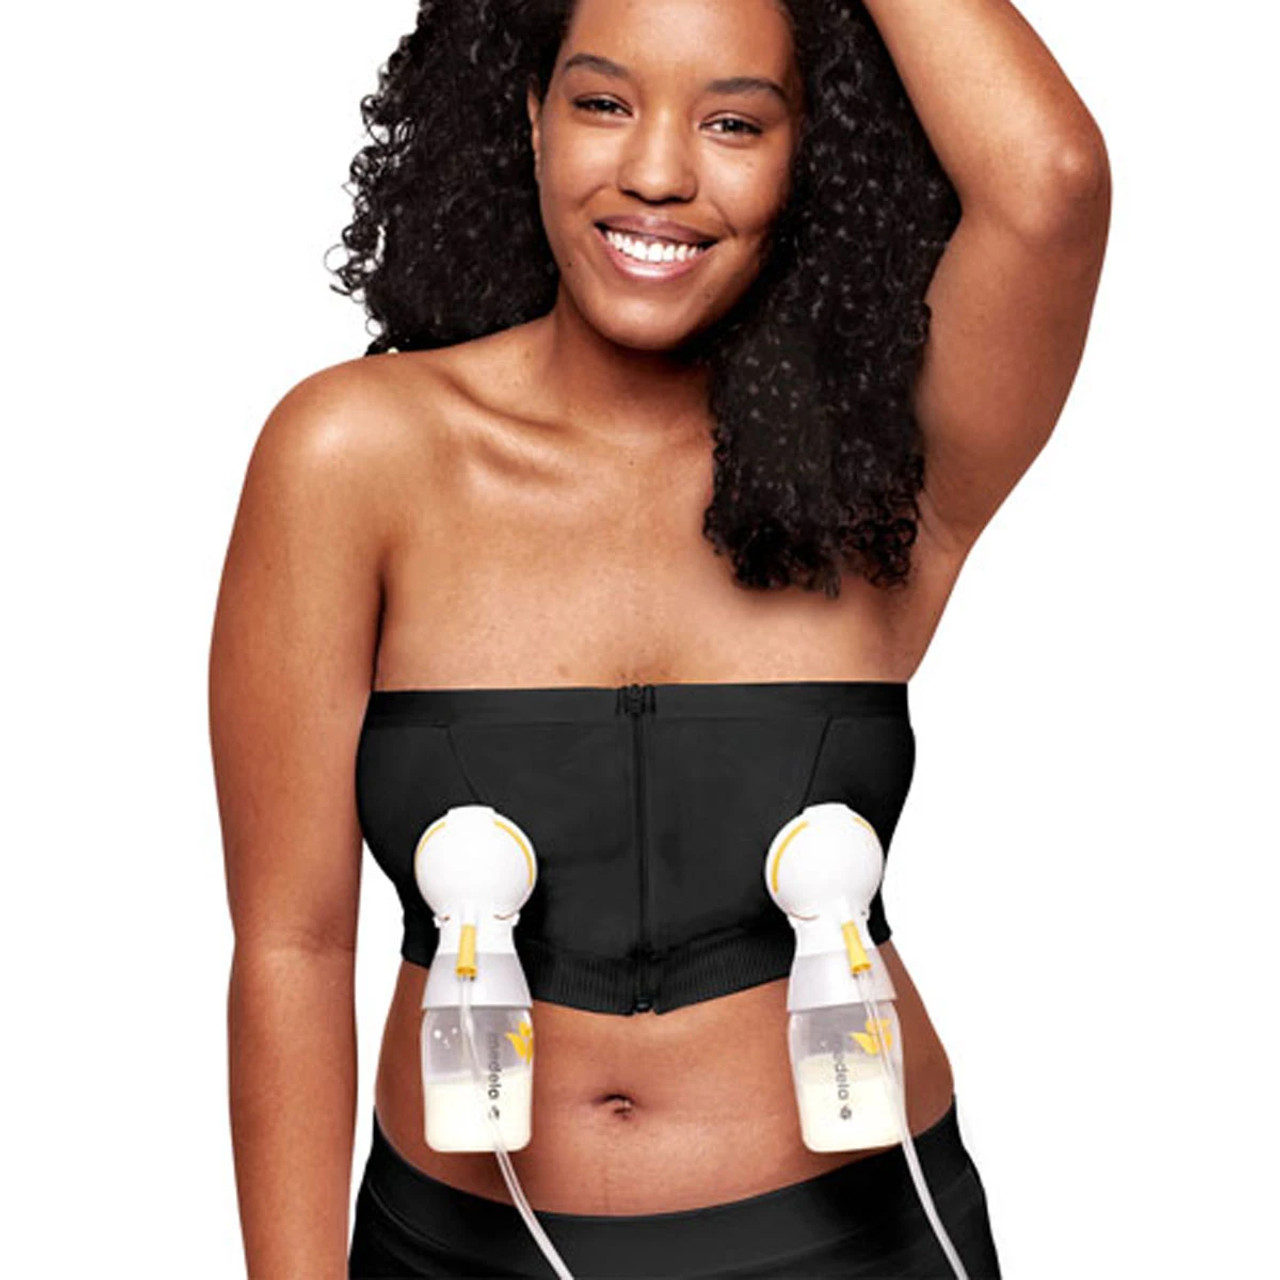 Buy Medela Freestyle Hands Free Breast Pump [Save Up To 40%]